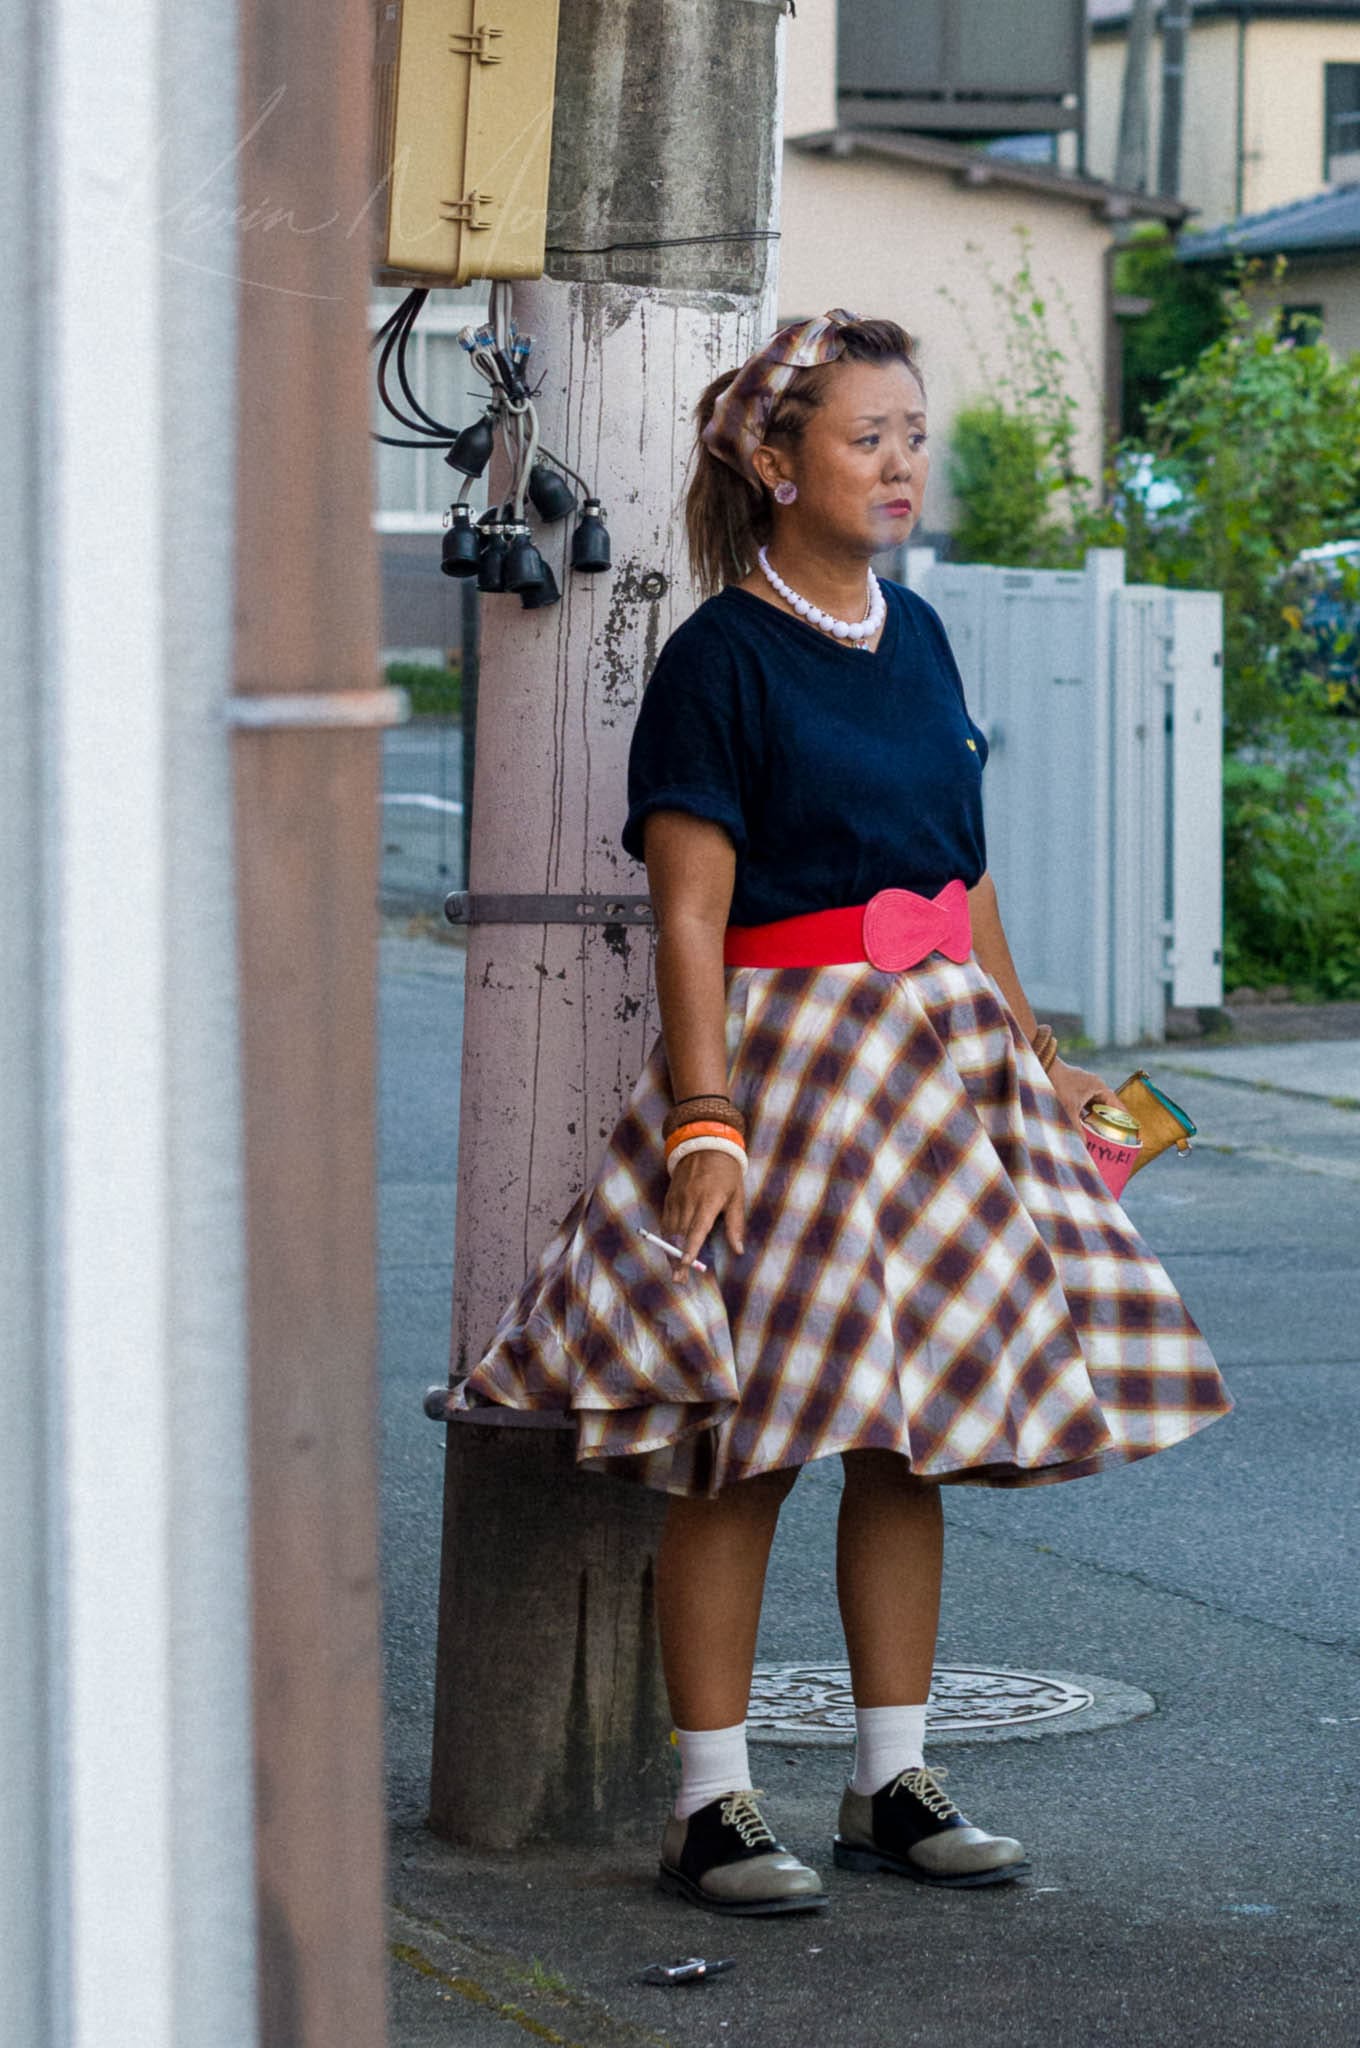 1950s-inspired street style portrait in a tranquil suburban setting, featuring plaid skirt and saddle shoes.